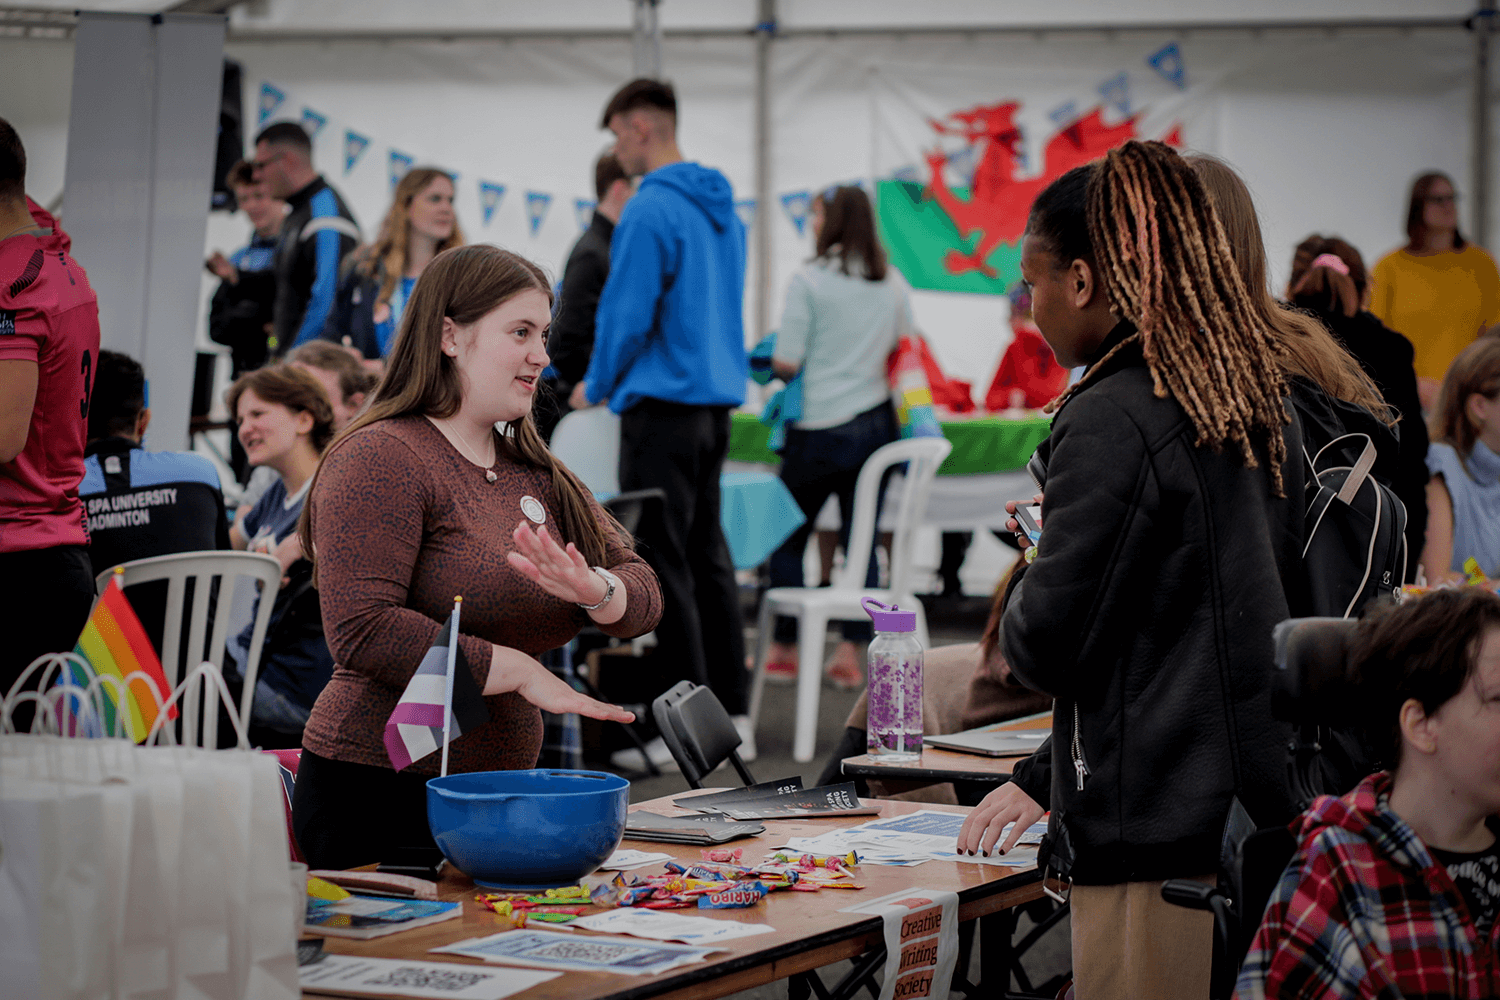 a member of the creative writing society at bath spa university stands behind their table at the activity fair. They are talking to a interested student who is stood the other side of the table